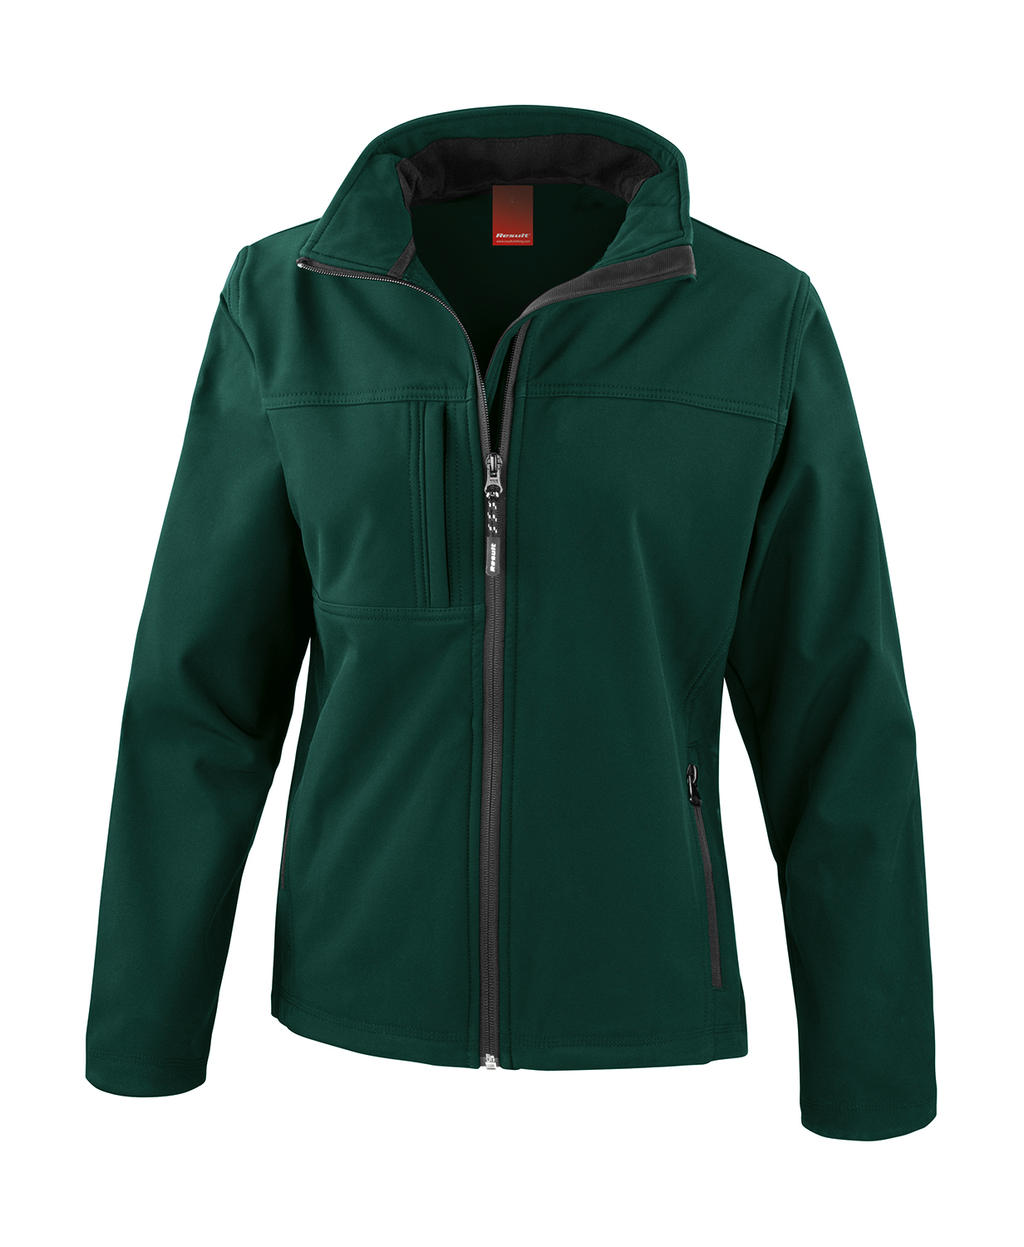  Ladies Classic Softshell Jacket in Farbe Bottle Green